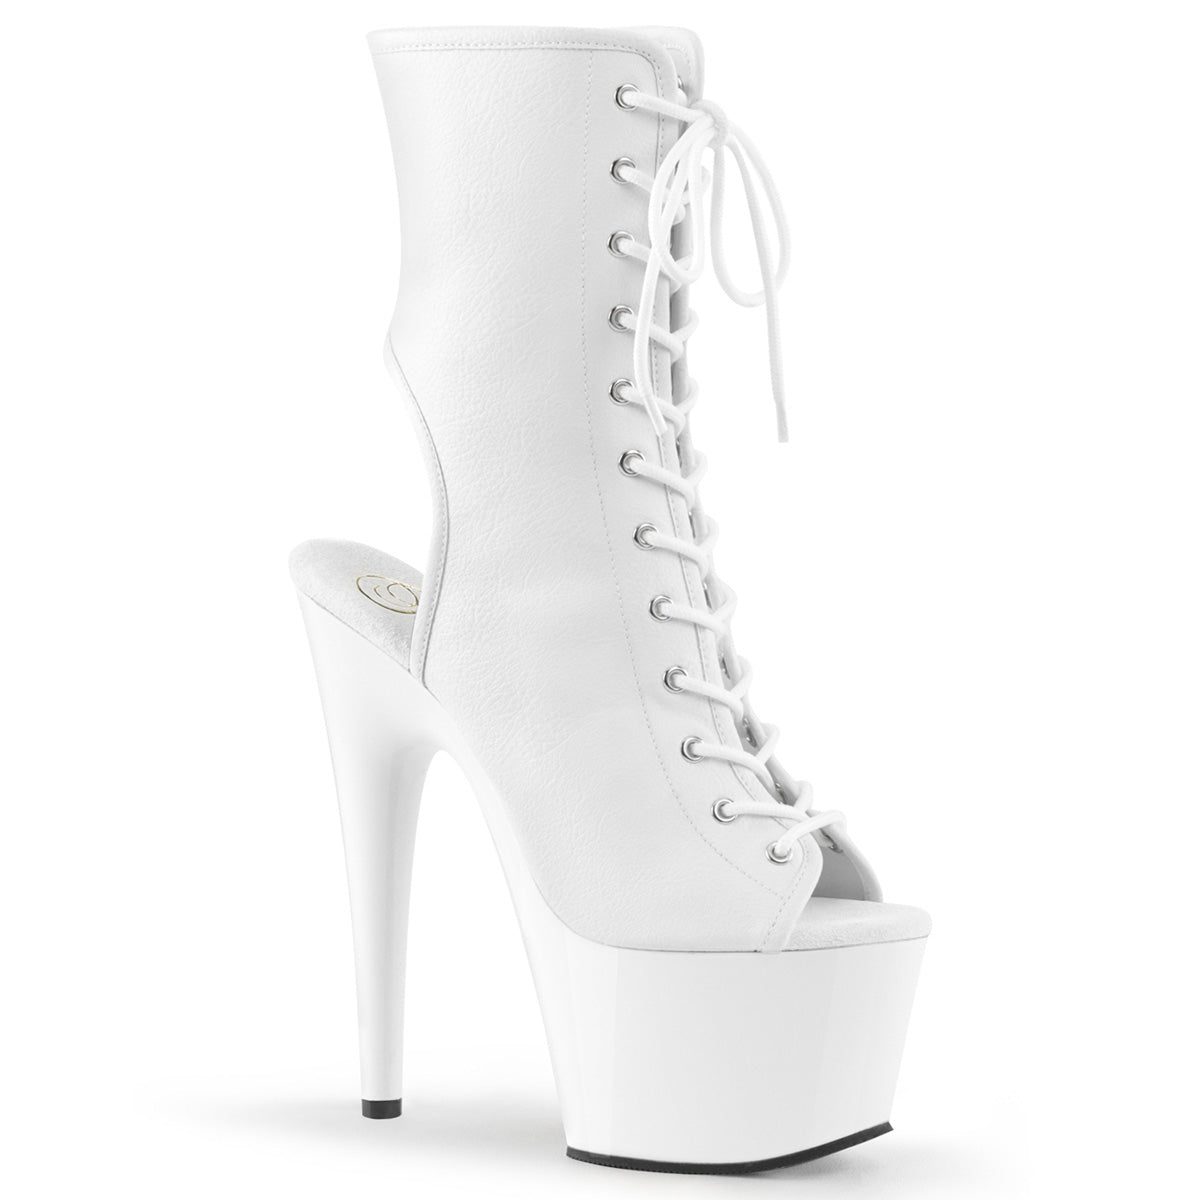 Pleaser Womens Ankle Boots ADORE-1016 Wht Faux Leather/Wht